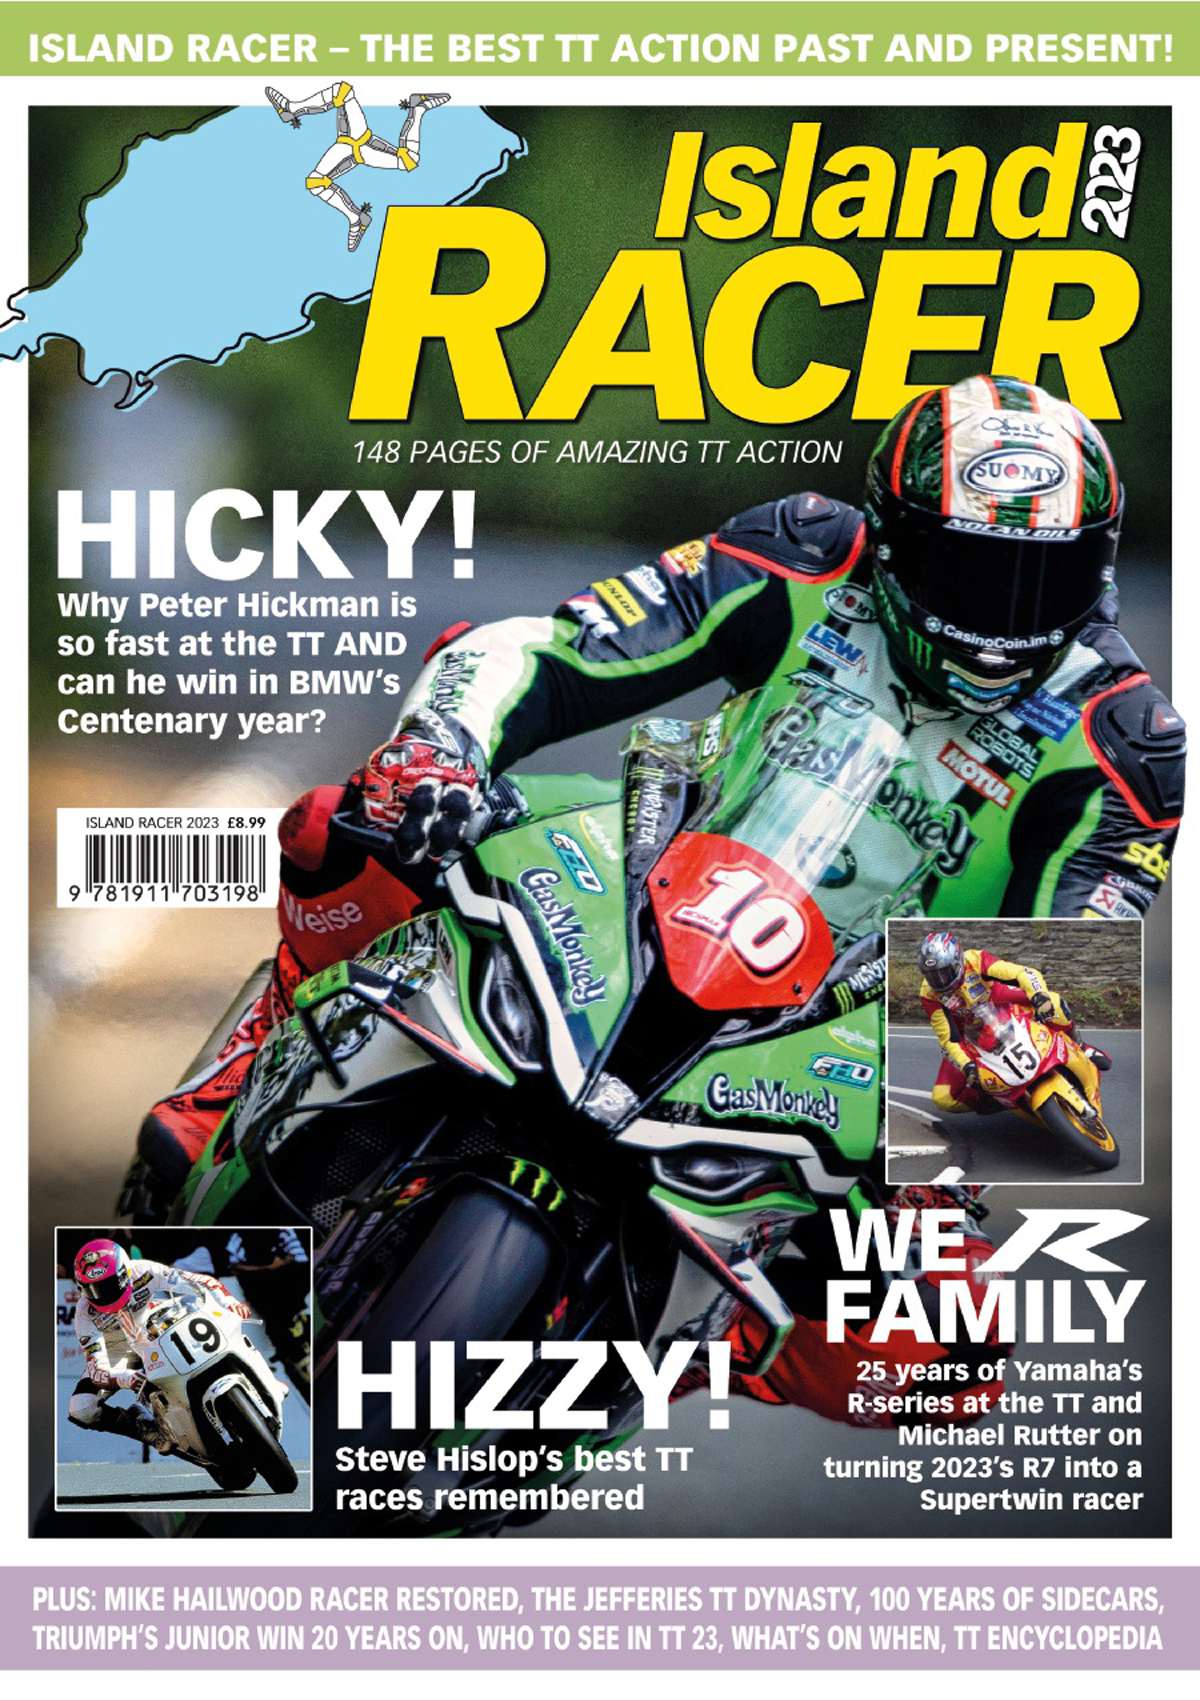 Island Racer 2023 - Your guide to the 2023 Isle of Man TT